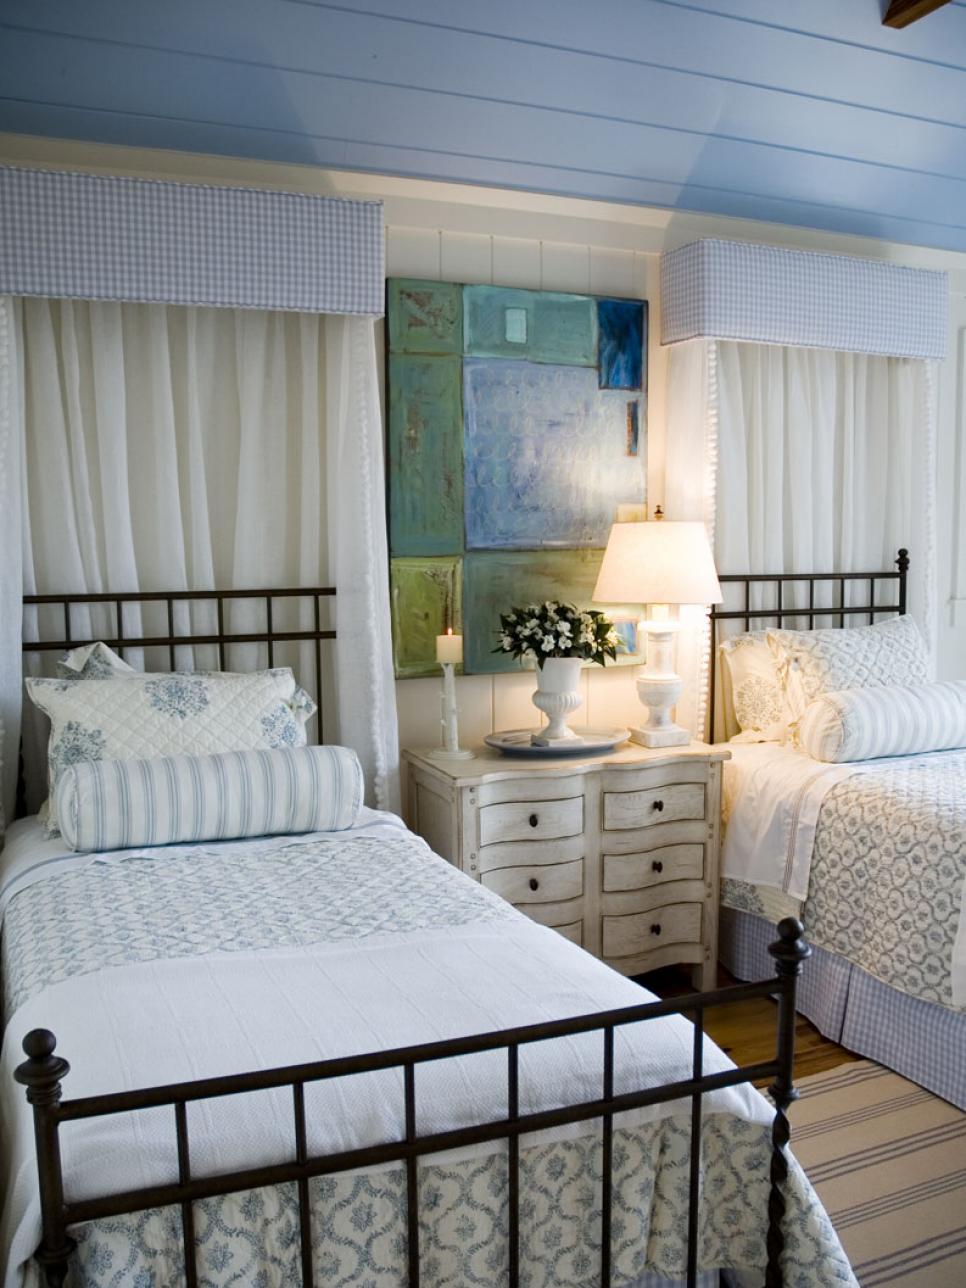 Blue and White Bedroom With Twin Beds, Cornices and Distressed Dresser